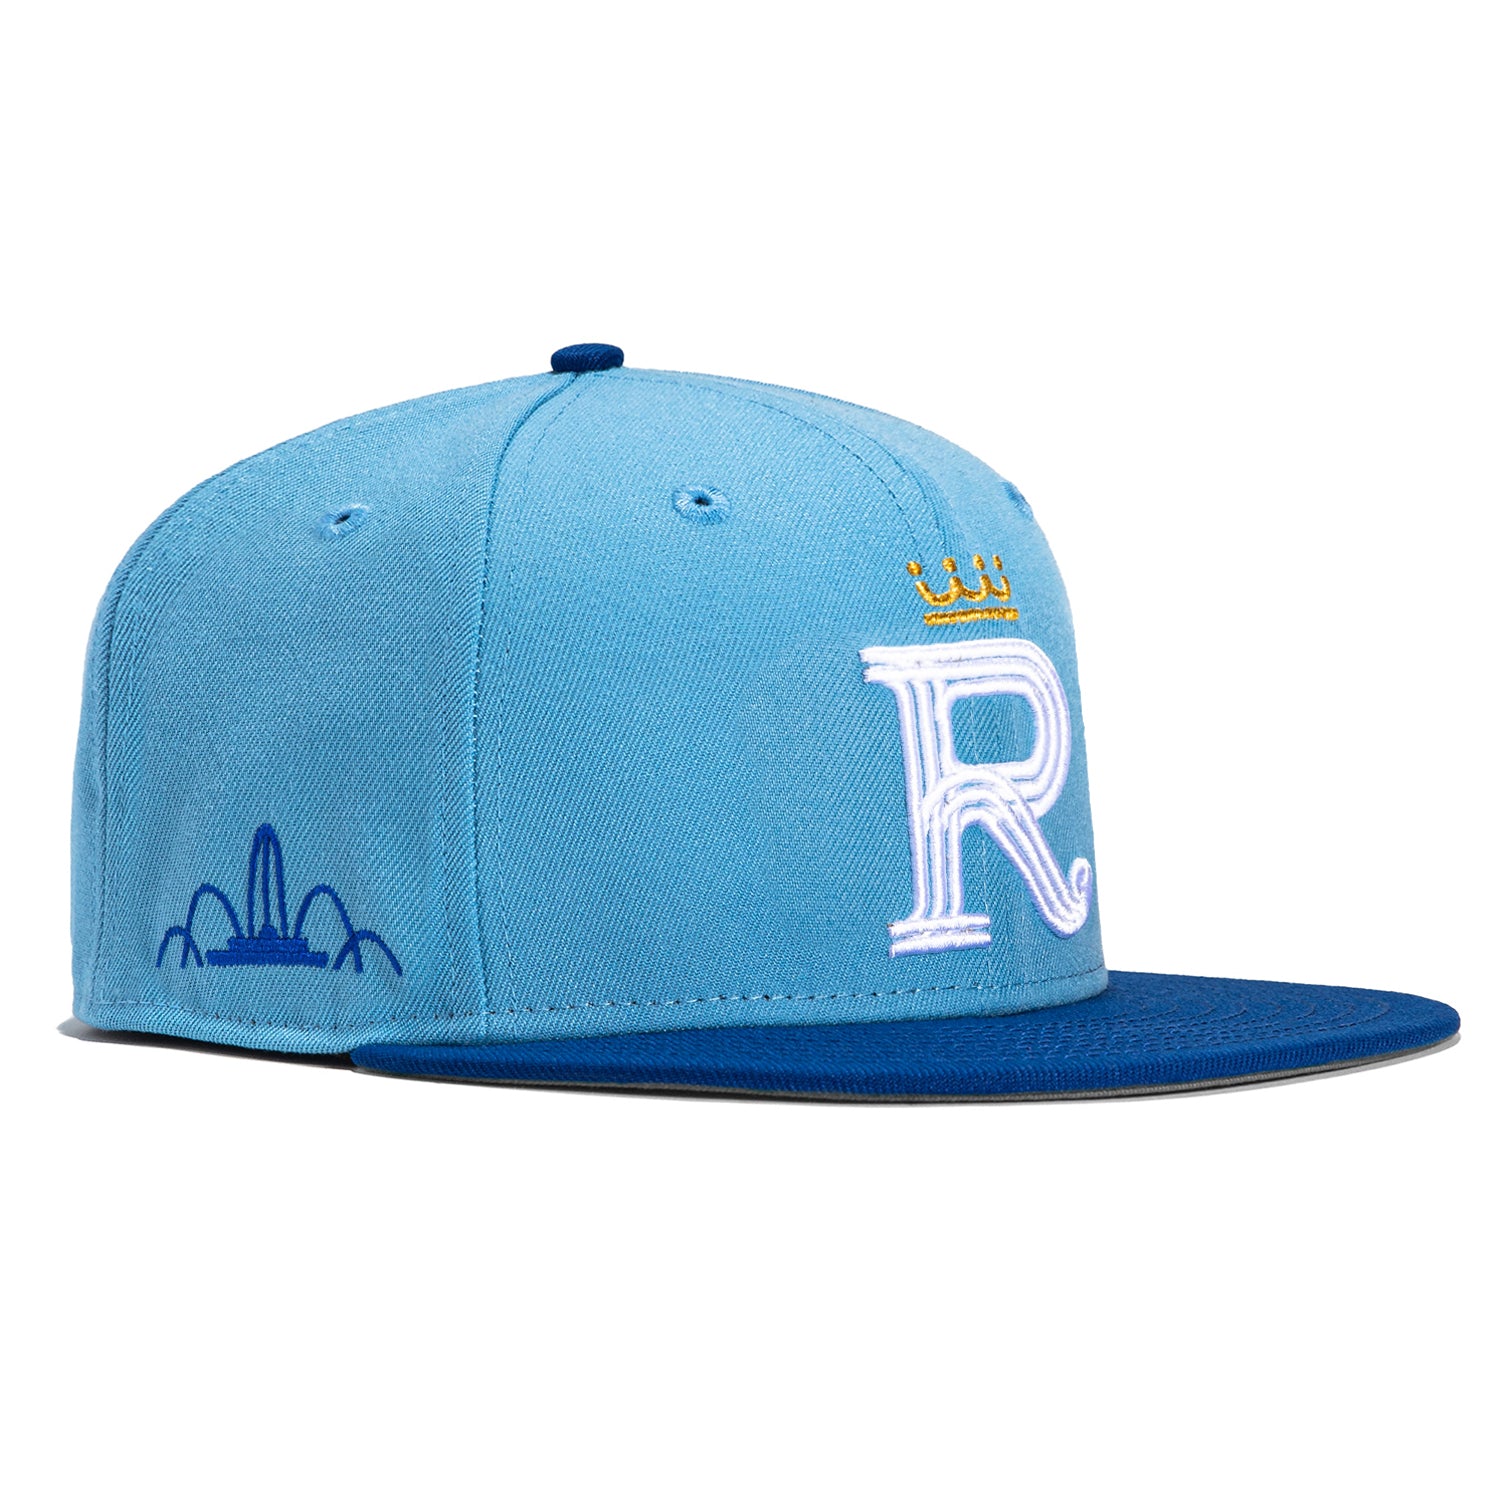 Kansas City Royals Home Batting Practice 59FIFTY Fitted Hat by New Era